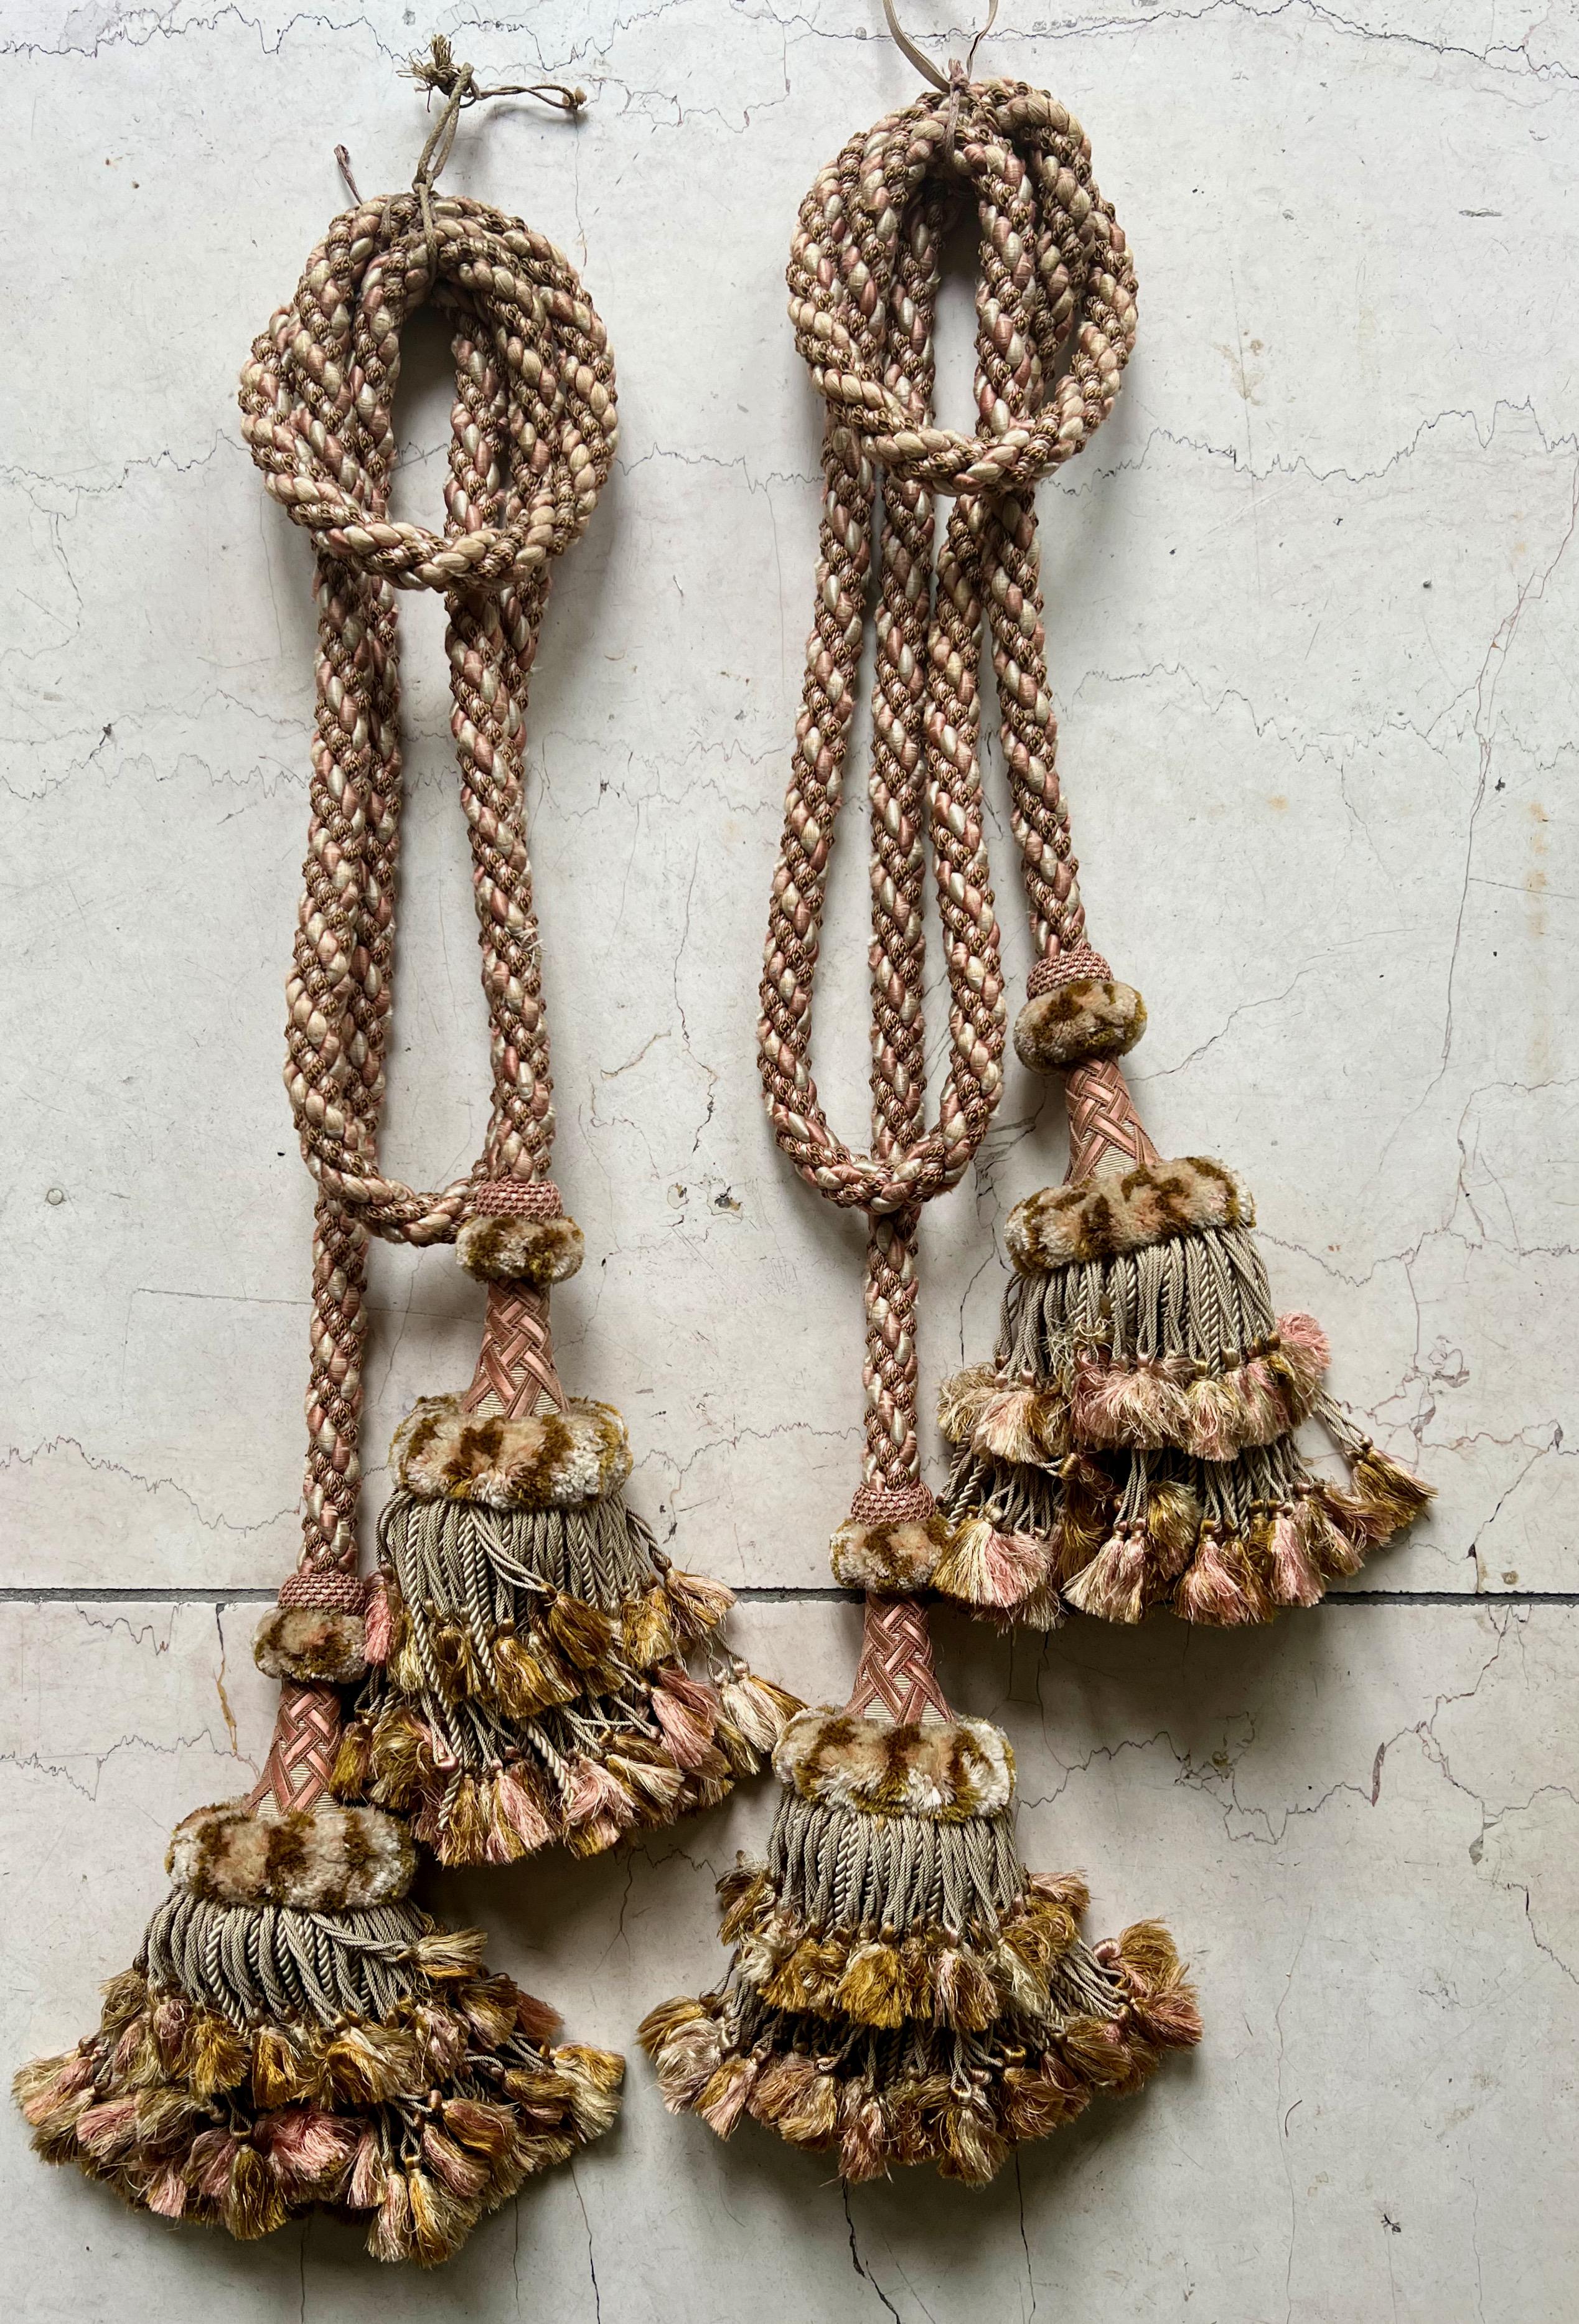 Pair of antique French passementerie curtain tiebacks / Chateau ropes and tassels
Very fine quality Impressive unusual examples, dating from 19th century.
Tassels are in very good antique condition just minimal signs of wear and age and